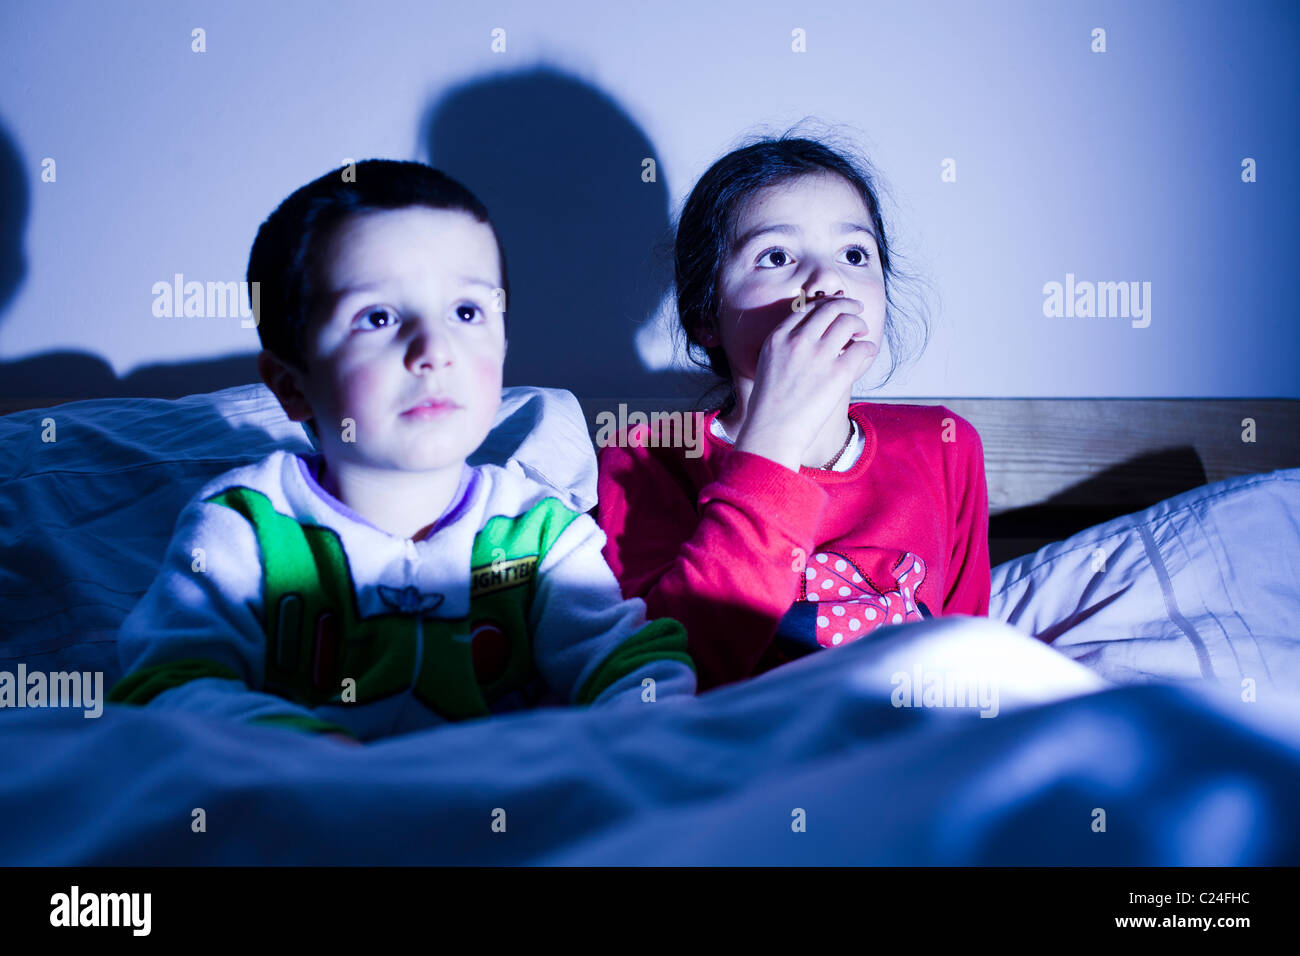 siblings-watching-tv-in-bed-together-C24